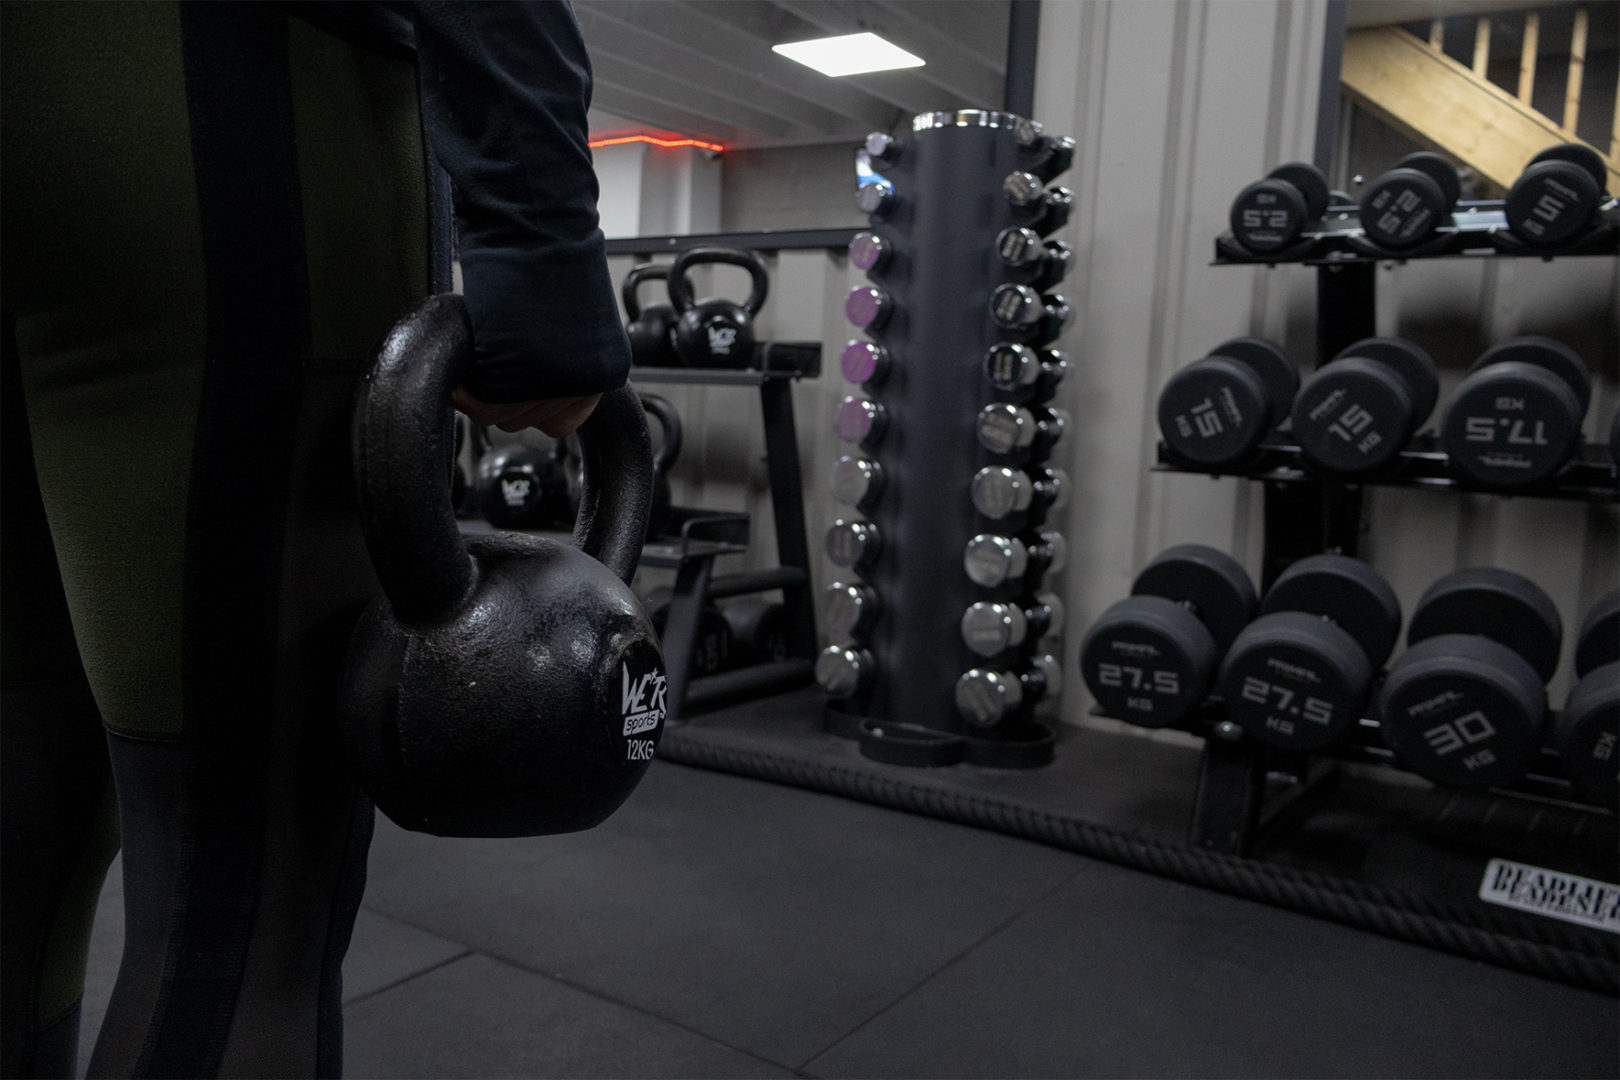 Client facing the wall, close up image of them holding a kettlebell